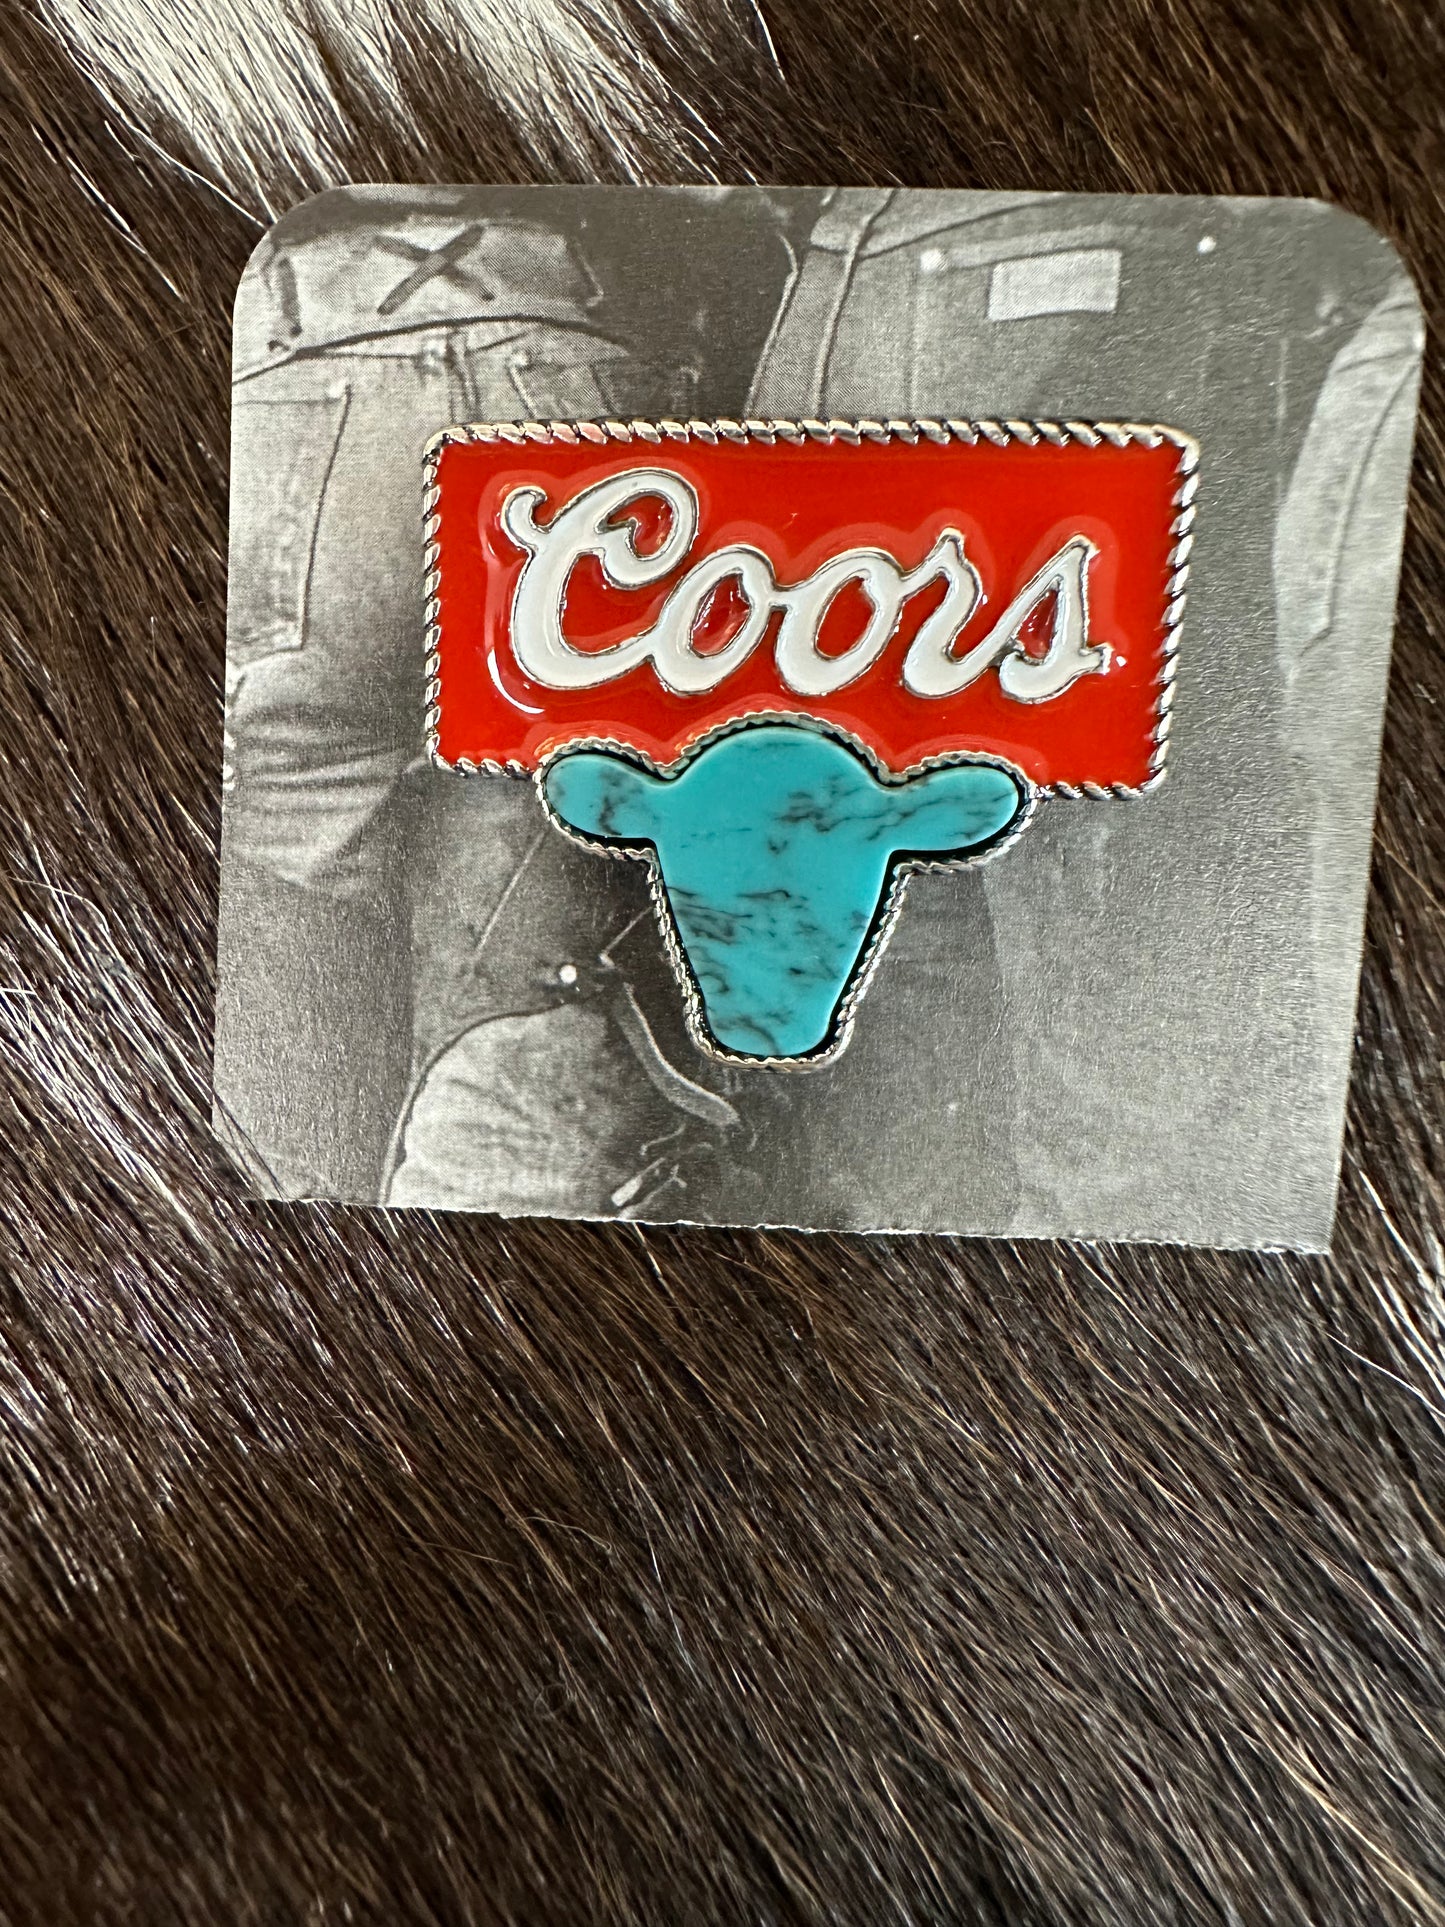 The Coors Hat Pin